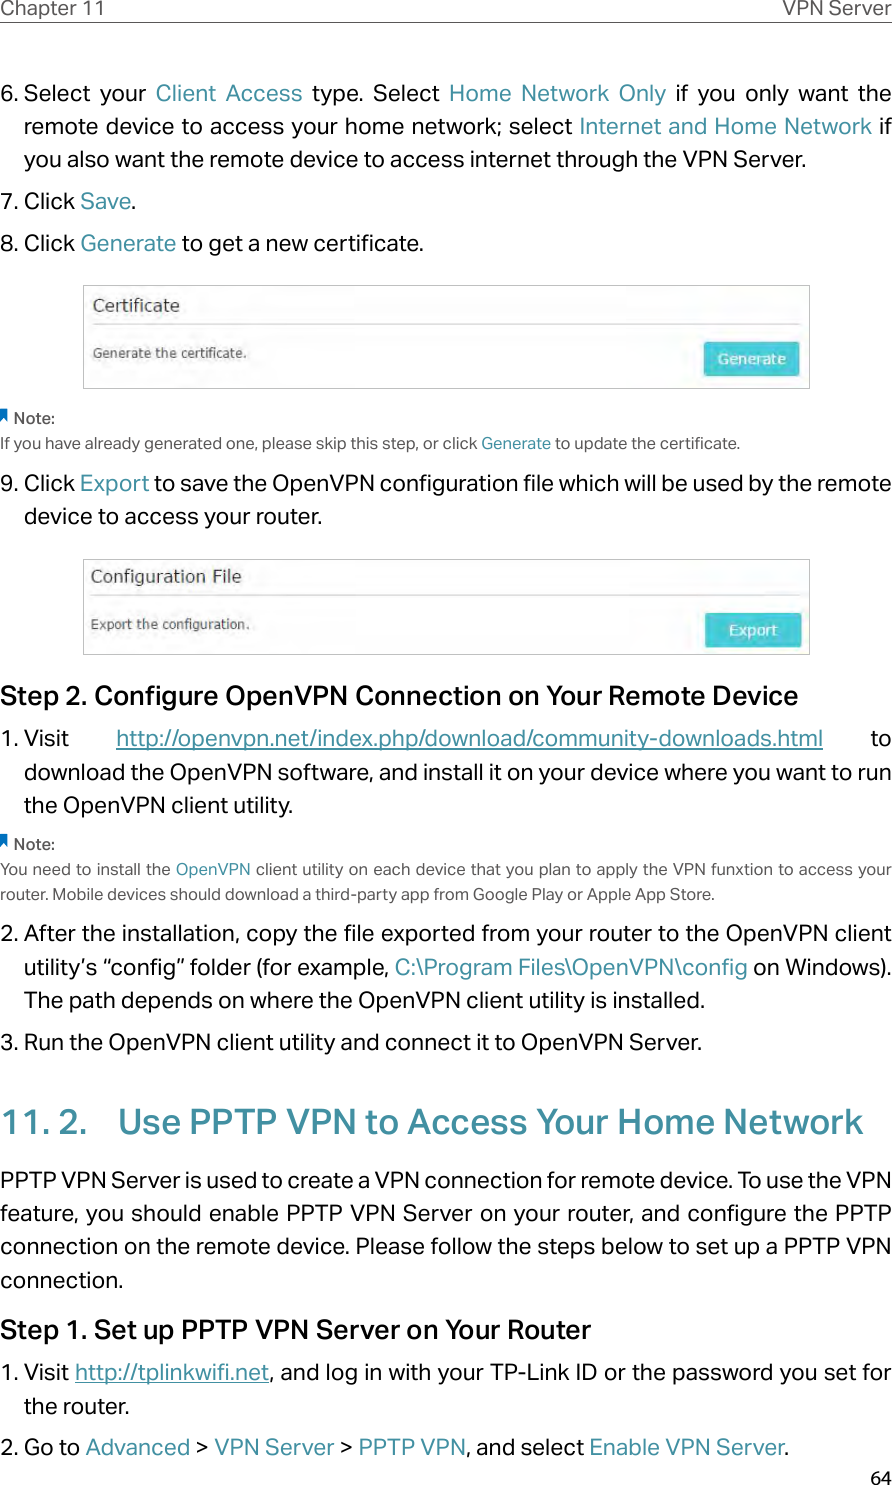 64Chapter 11 VPN Server6. Select your Client Access type. Select Home Network Only if you only want the remote device to access your home network; select Internet and Home Network if  you also want the remote device to access internet through the VPN Server.7. Click Save.8. Click Generate to get a new certificate. Note:If you have already generated one, please skip this step, or click Generate to update the certificate.9. Click Export to save the OpenVPN configuration file which will be used by the remote device to access your router.Step 2. Configure OpenVPN Connection on Your Remote Device1. Visit  http://openvpn.net/index.php/download/community-downloads.html to download the OpenVPN software, and install it on your device where you want to run the OpenVPN client utility.Note:You need to install the OpenVPN client utility on each device that you plan to apply the VPN funxtion to access your router. Mobile devices should download a third-party app from Google Play or Apple App Store.2. After the installation, copy the file exported from your router to the OpenVPN client utility’s “config” folder (for example, C:\Program Files\OpenVPN\config on Windows). The path depends on where the OpenVPN client utility is installed.3. Run the OpenVPN client utility and connect it to OpenVPN Server.11. 2.  Use PPTP VPN to Access Your Home NetworkPPTP VPN Server is used to create a VPN connection for remote device. To use the VPN feature, you should enable PPTP VPN Server on your router, and configure the PPTP connection on the remote device. Please follow the steps below to set up a PPTP VPN connection.Step 1. Set up PPTP VPN Server on Your Router1. Visit http://tplinkwifi.net, and log in with your TP-Link ID or the password you set for the router.2. Go to Advanced &gt; VPN Server &gt; PPTP VPN, and select Enable VPN Server.